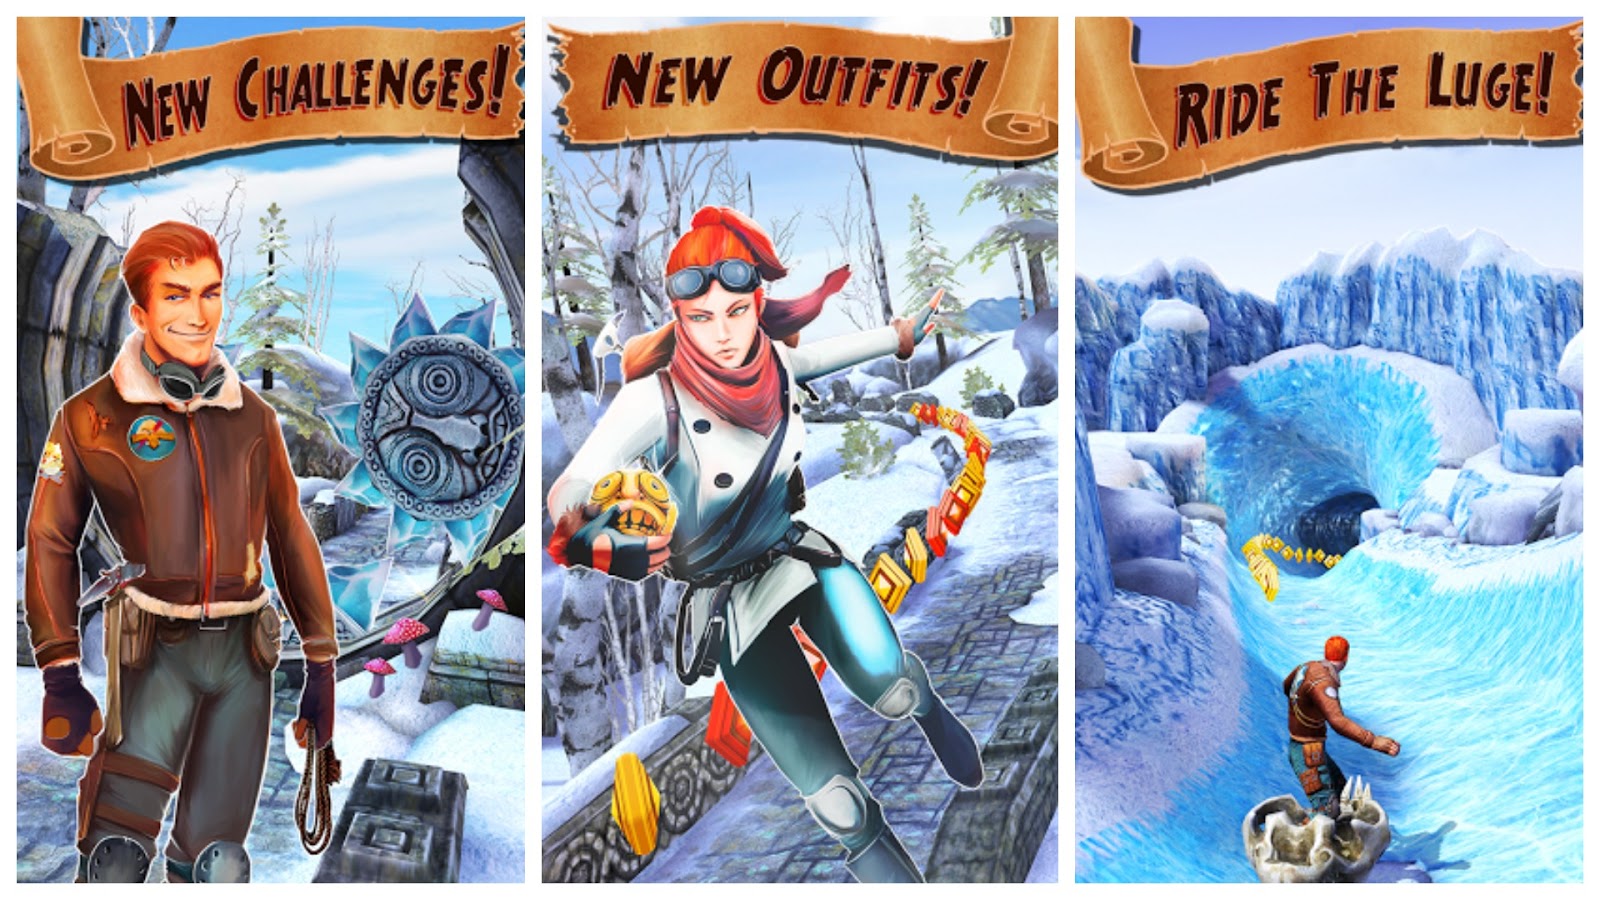 Temple Run 2 - Frozen Shadows Gameplay Video  ❄️A cold wind is blowing  across the land of Temple Run 2. Welcome to Frozen Shadows!🏂 Surf the ice  luge and race across